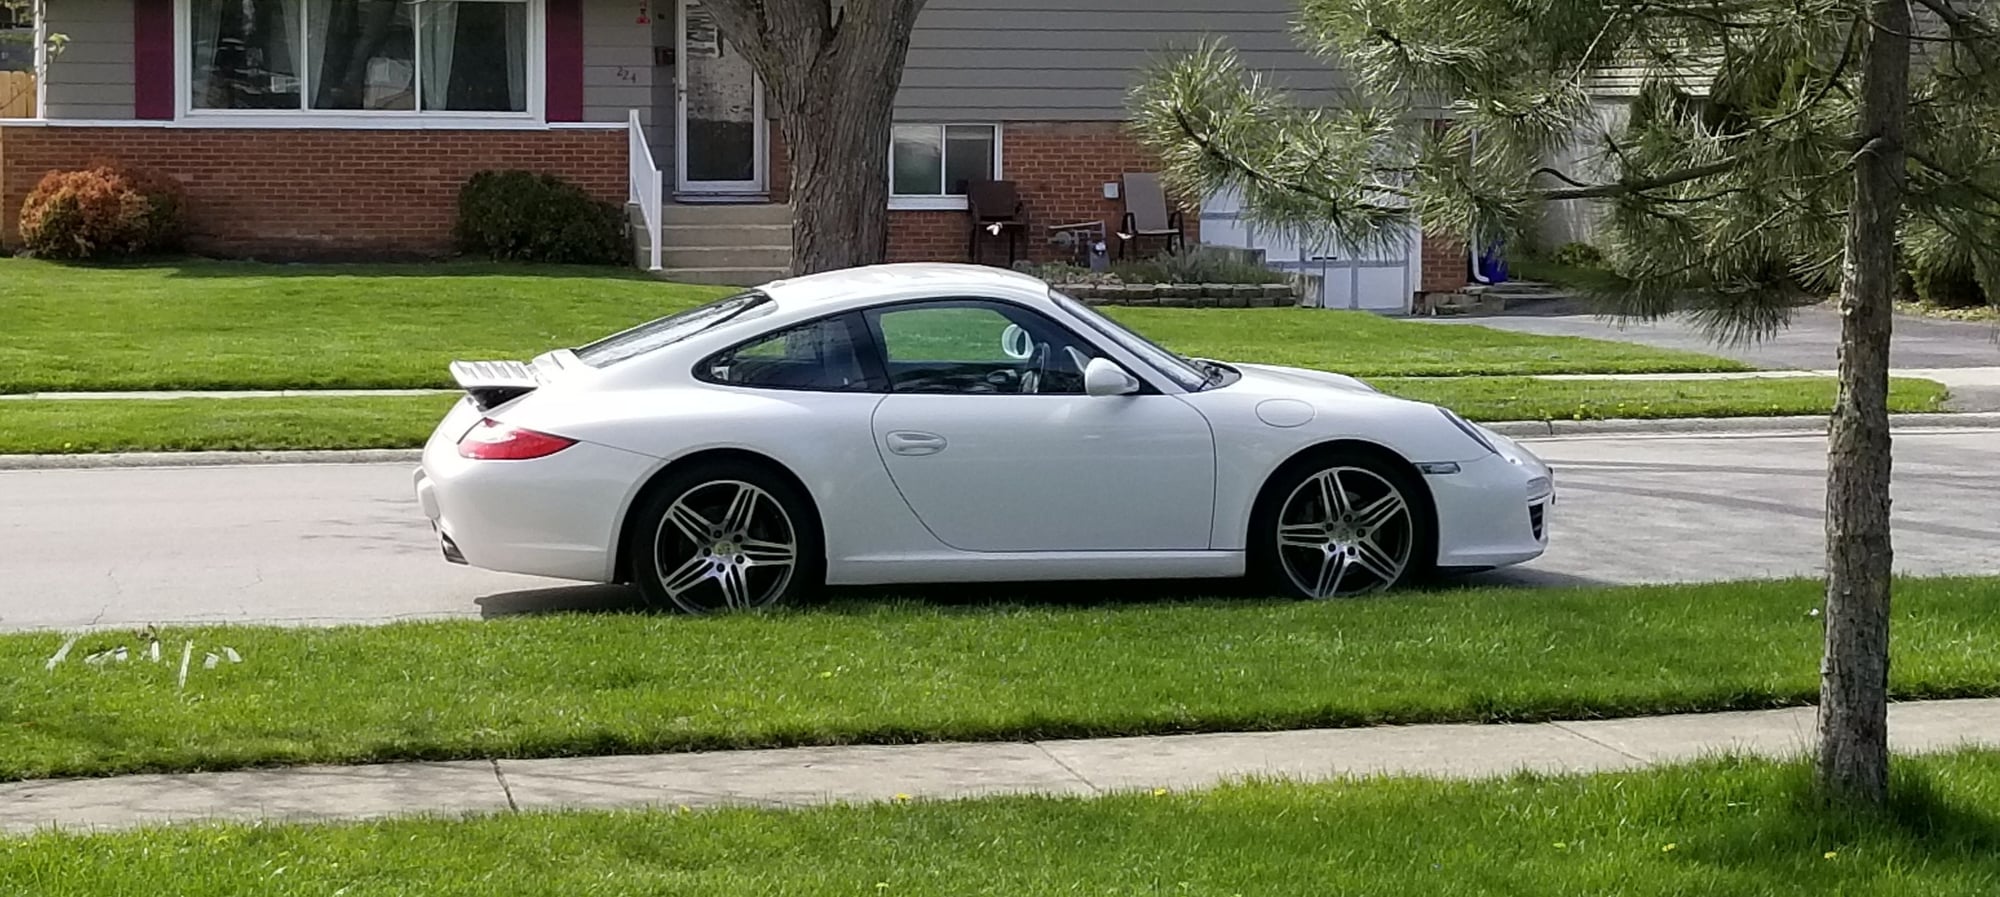 FOR SALE 2009 911 Carrera 997.2 PDK 69,500 miles 2nd